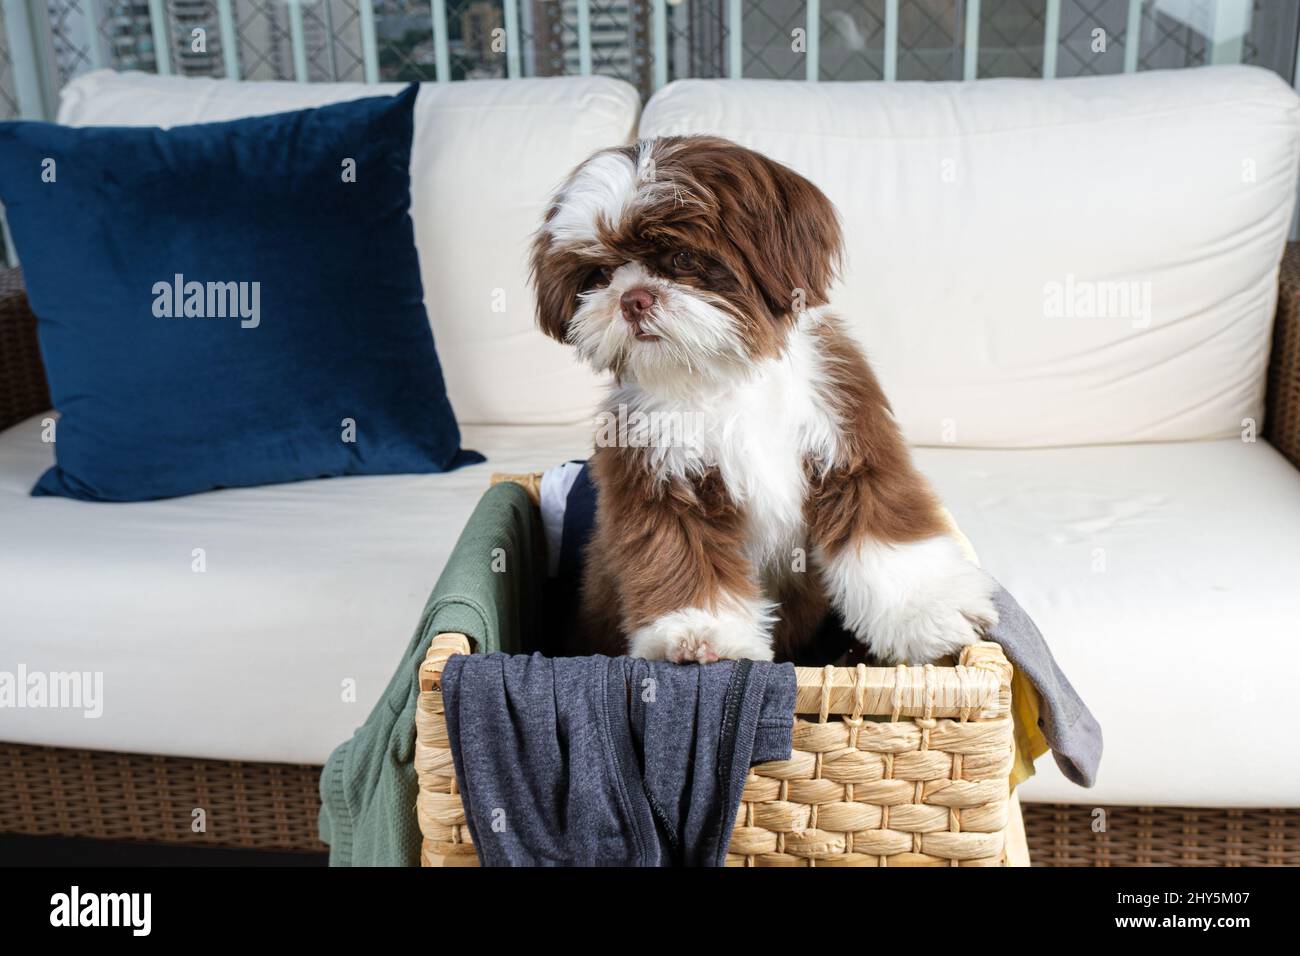 Shih tzu puppy coming out of a laundry basket and looking down. Stock Photo